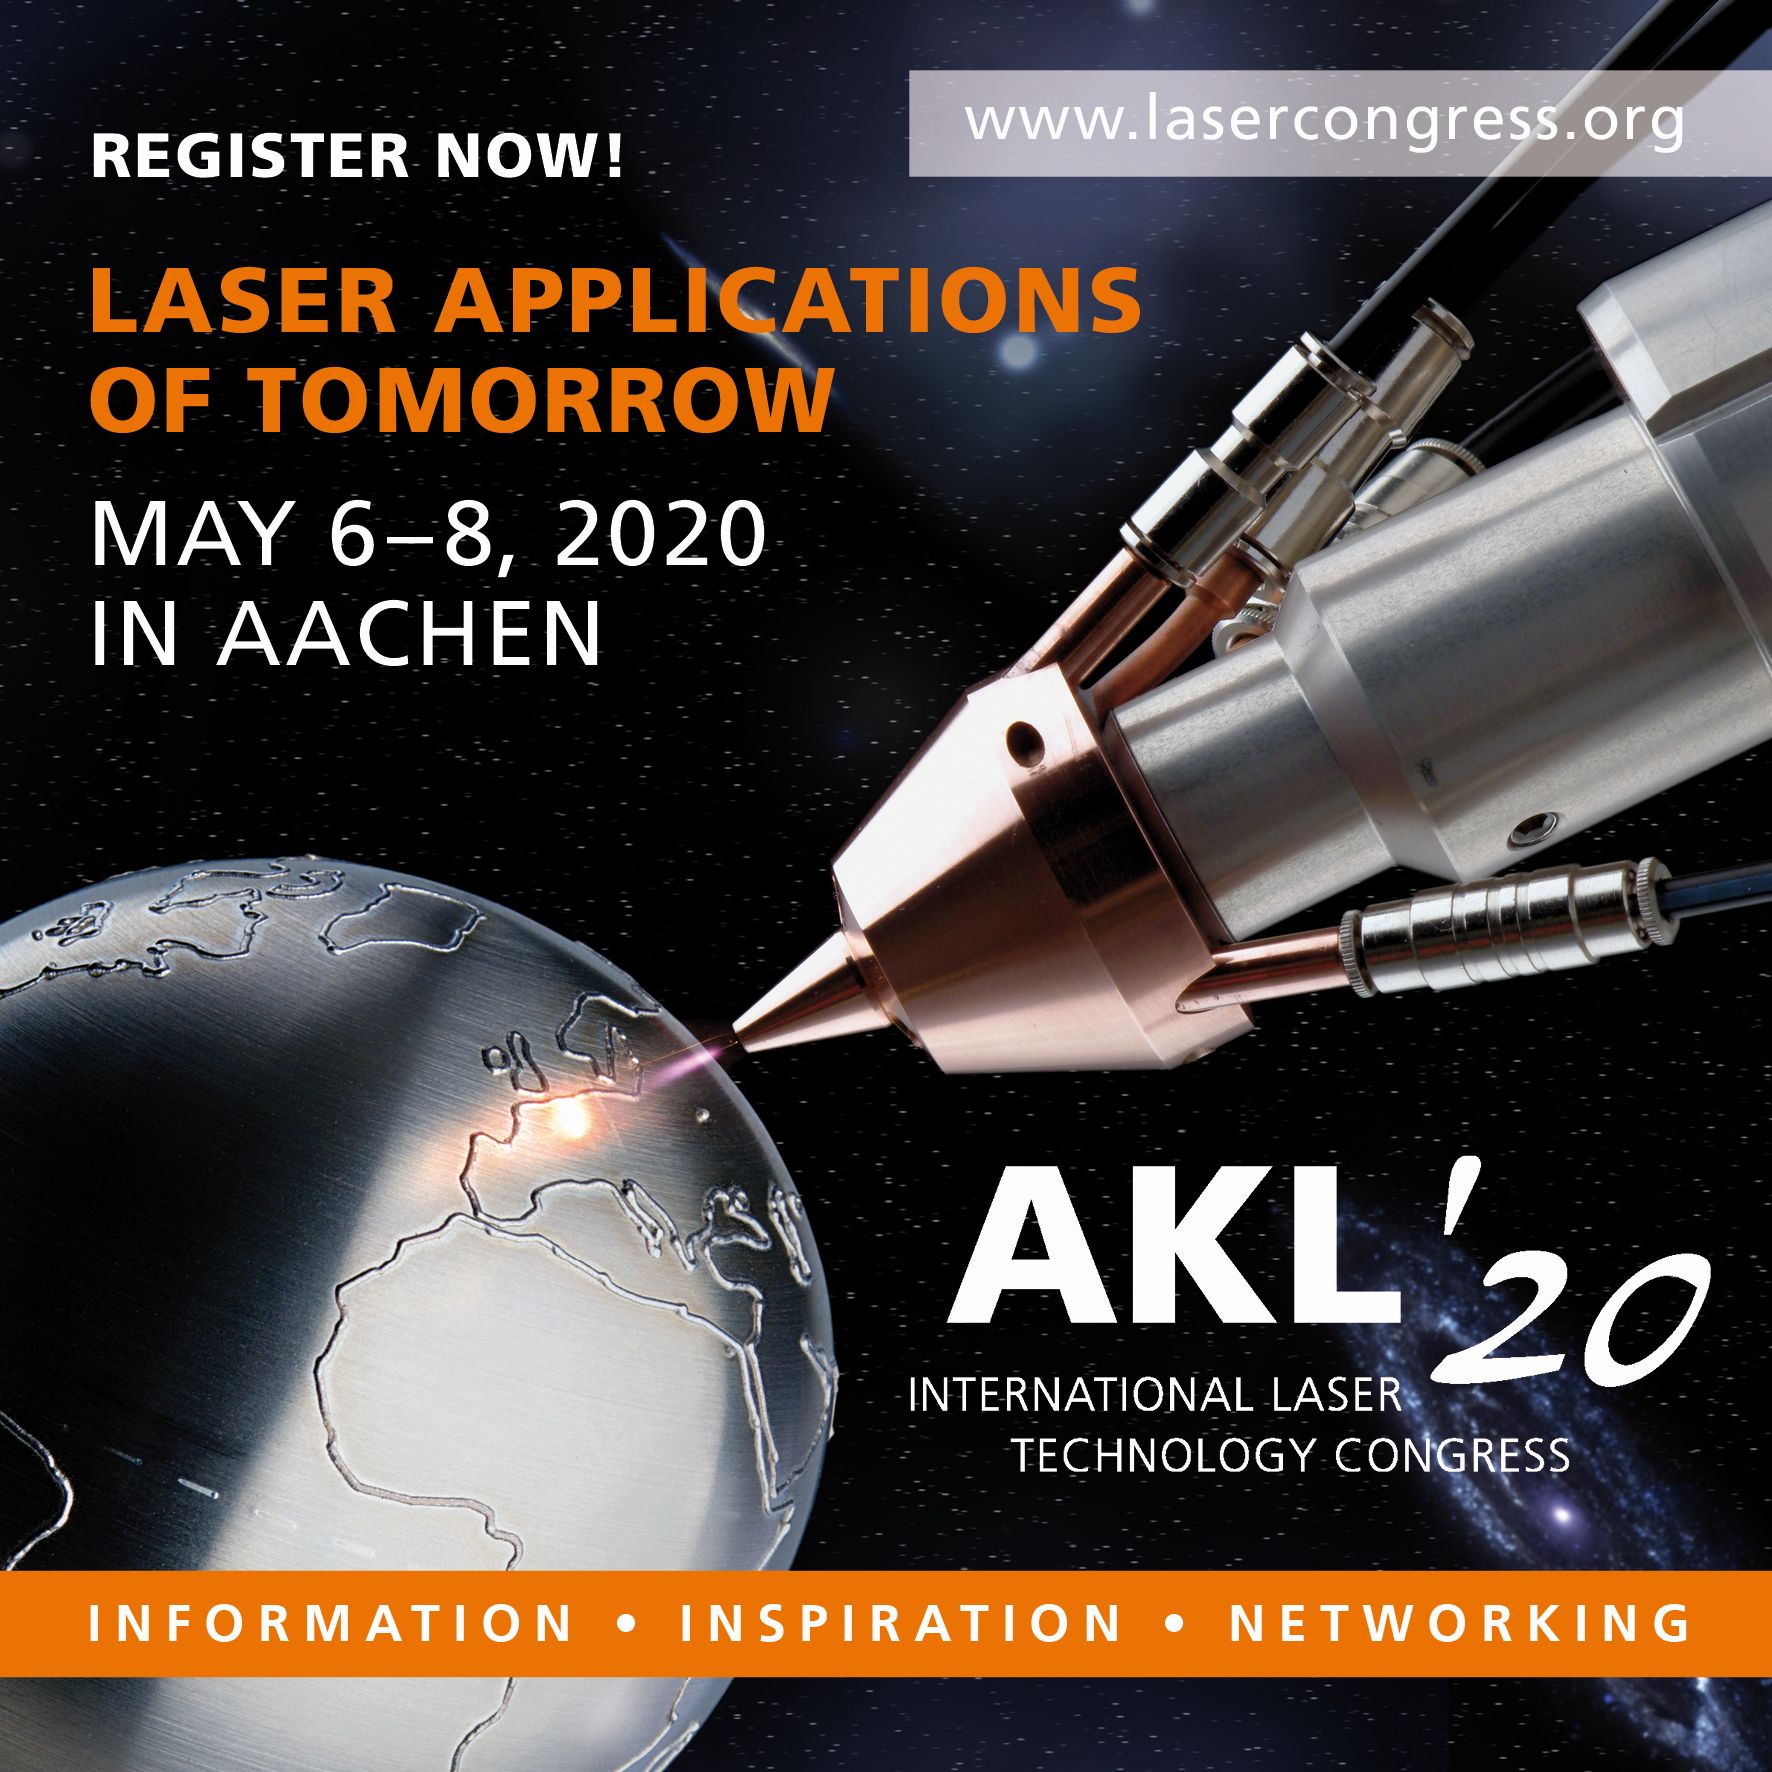 AKL – International Laser Technology Congress: Europe’s leading forum for applied laser technology in production.